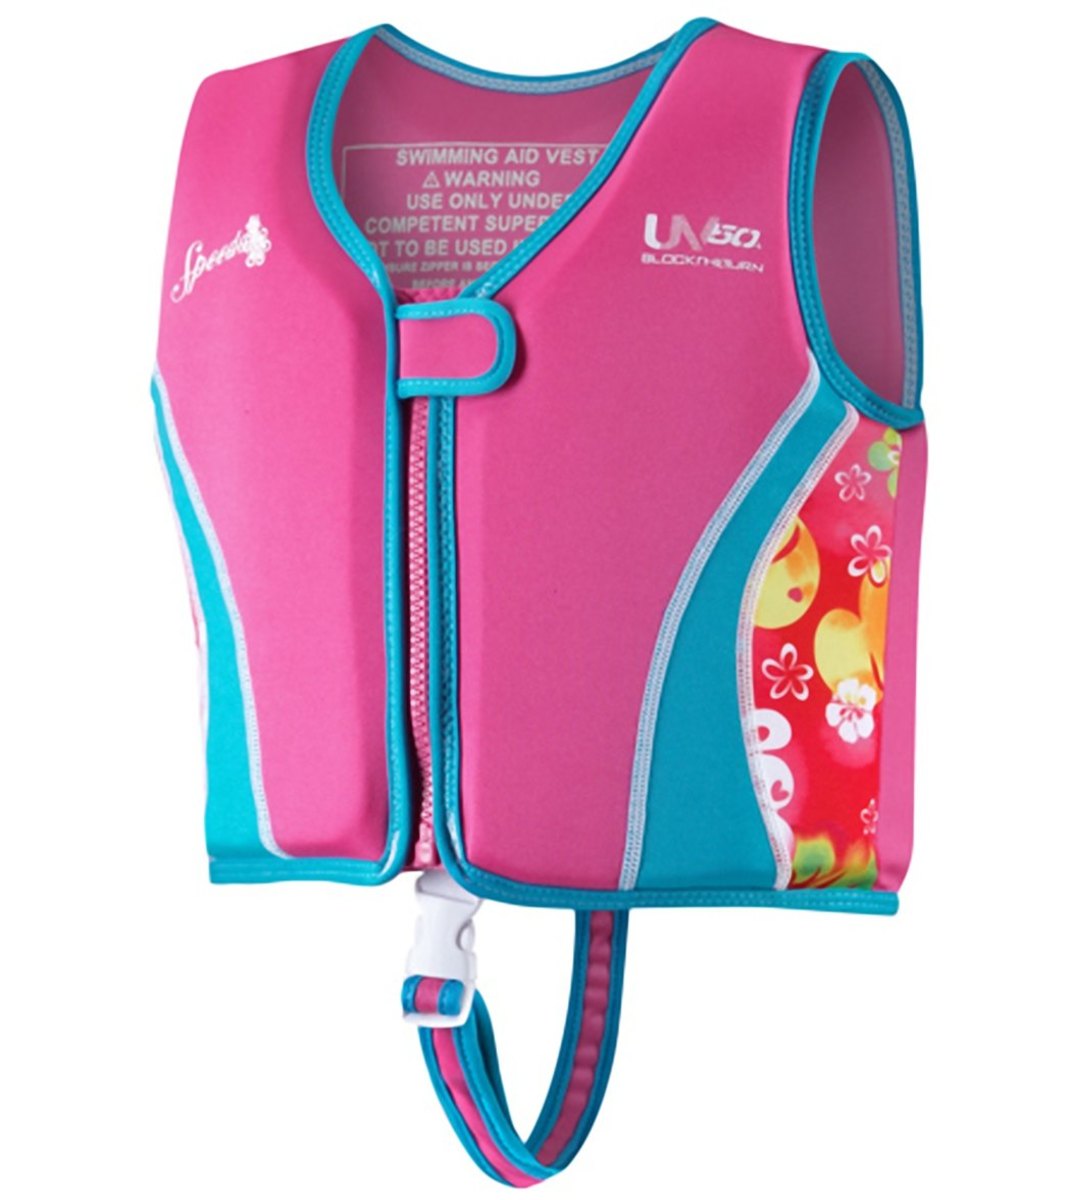 Altitud cobertura Canadá The 5 Best Swim Devices for Toddlers and Pre-Schoolers - WeHaveKids